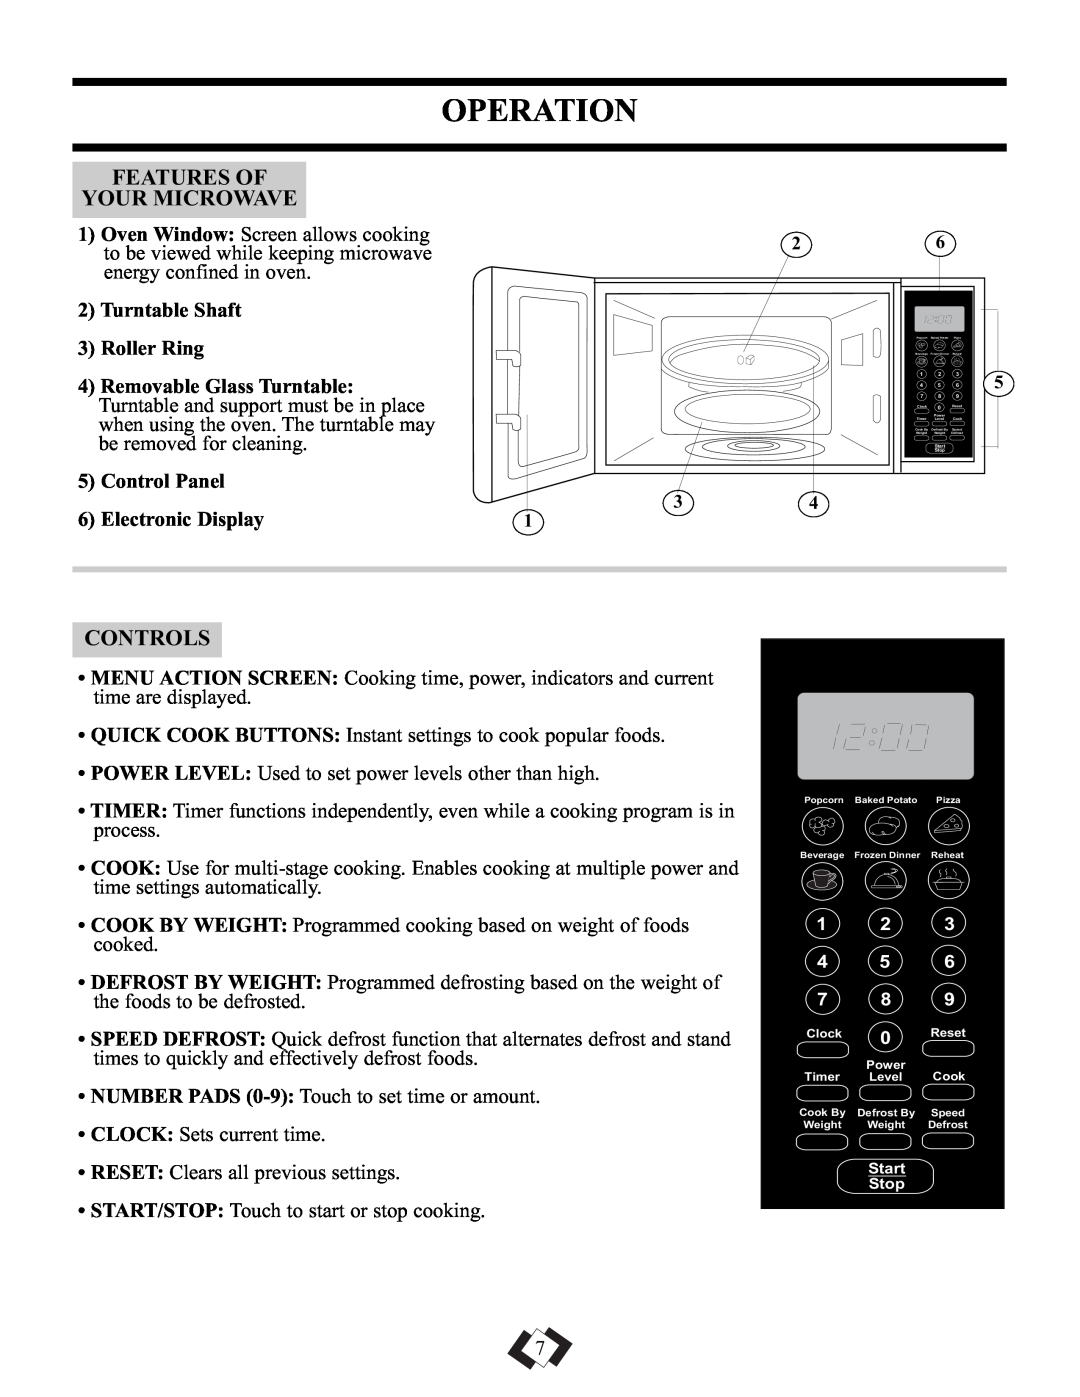 Danby DMW101KSSDD operating instructions Operation, Features Of Your Microwave, Controls, Turntable Shaft 3 Roller Ring 